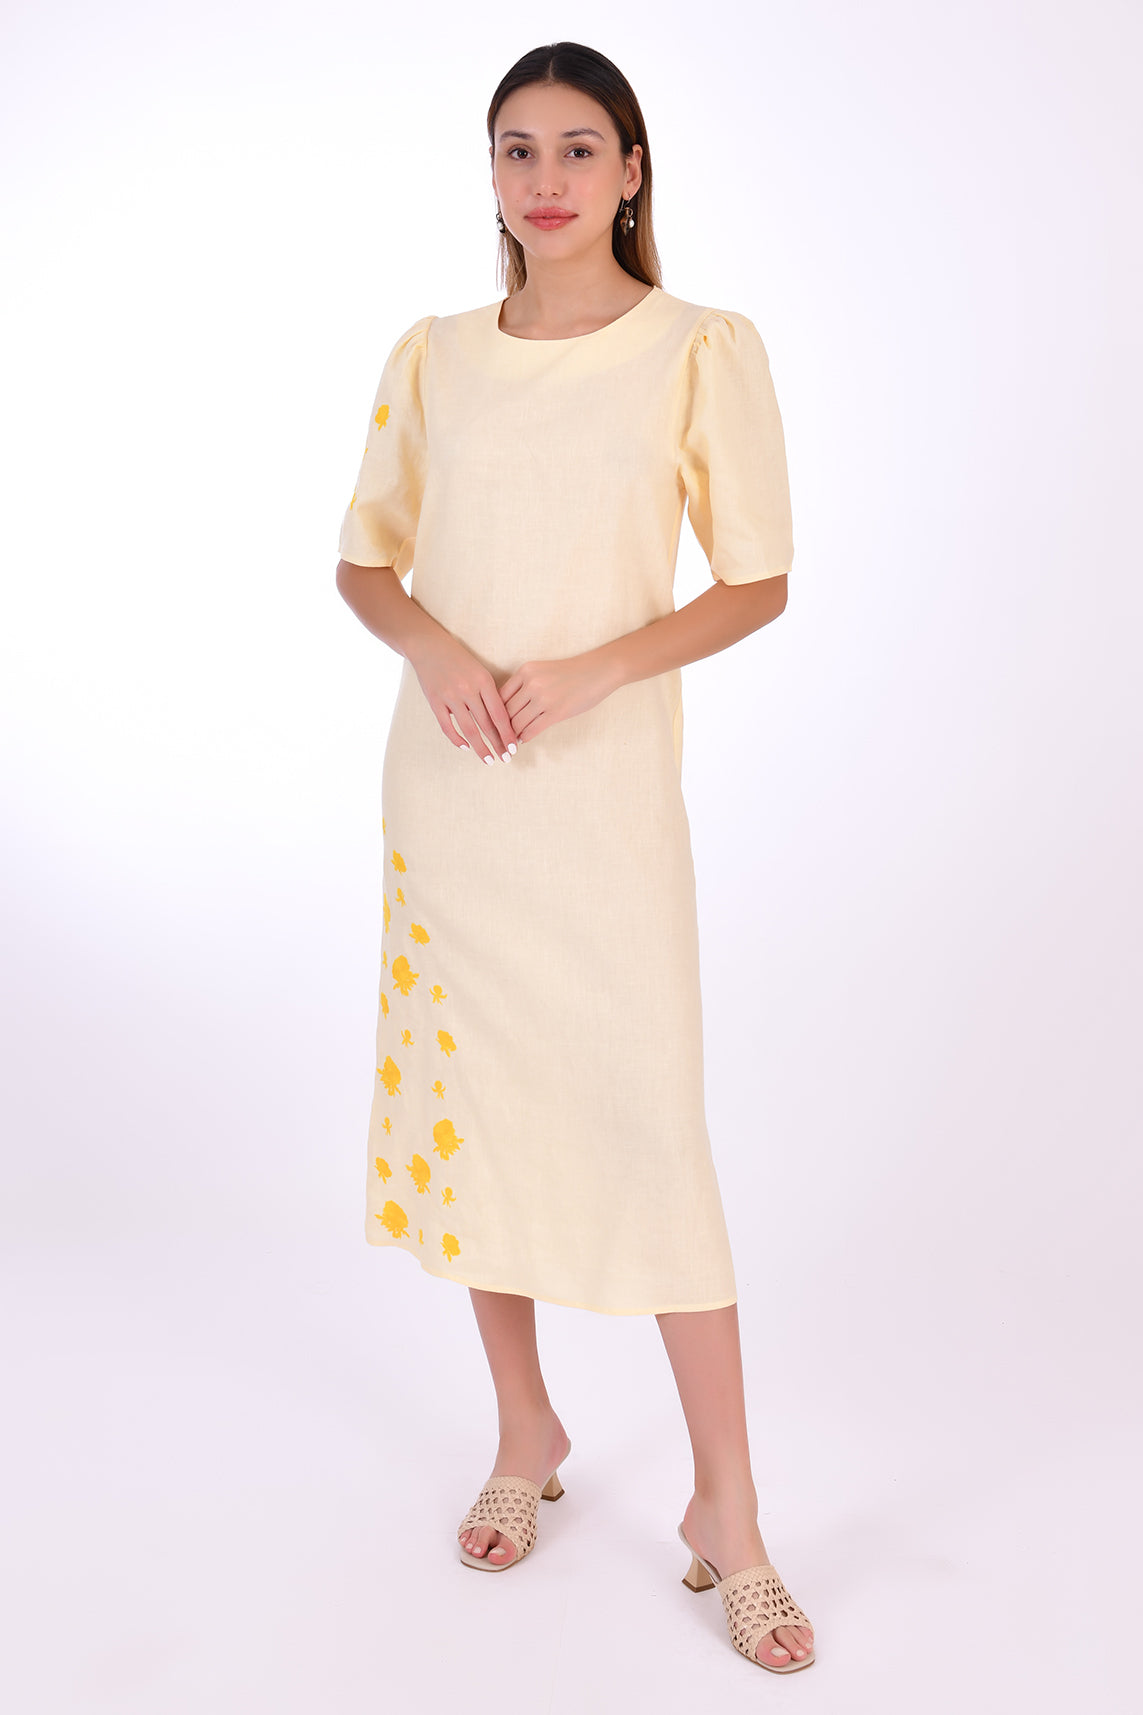 Doga Midi Linen Dress, Front View. Featuring a peephole open back and button closure. Round neck, with a belt for the waist (can be worn with or without), and features front embroidery detail. 